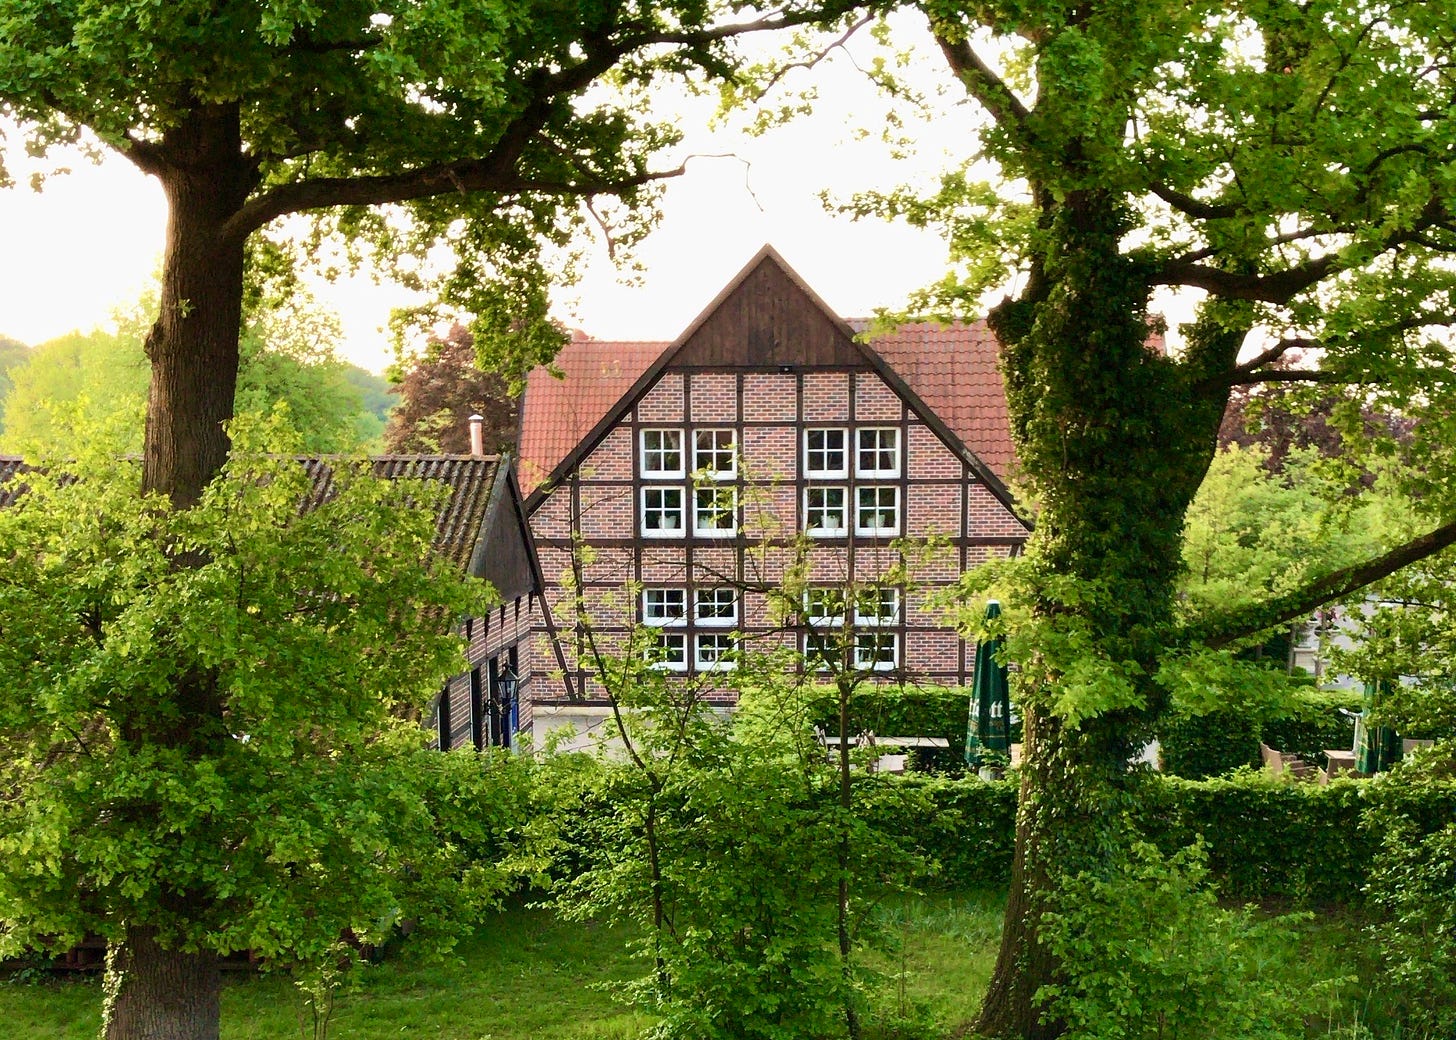 A red-brick building with half-timbered wood elements visible through lots of bright green trees